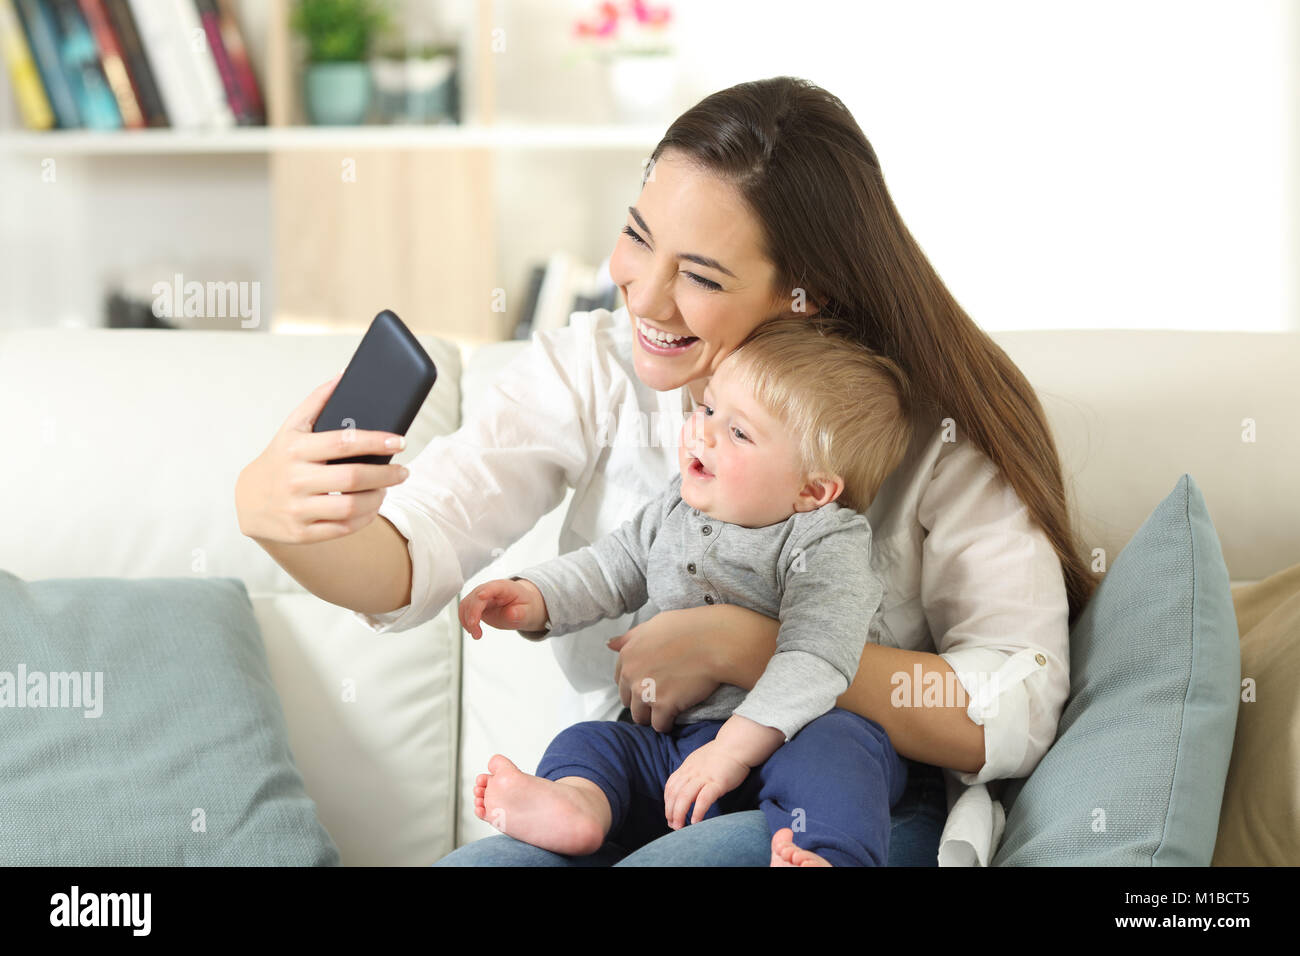 Mother taking a selfie with her baby son sitting on a couch in the living room at home Stock Photo